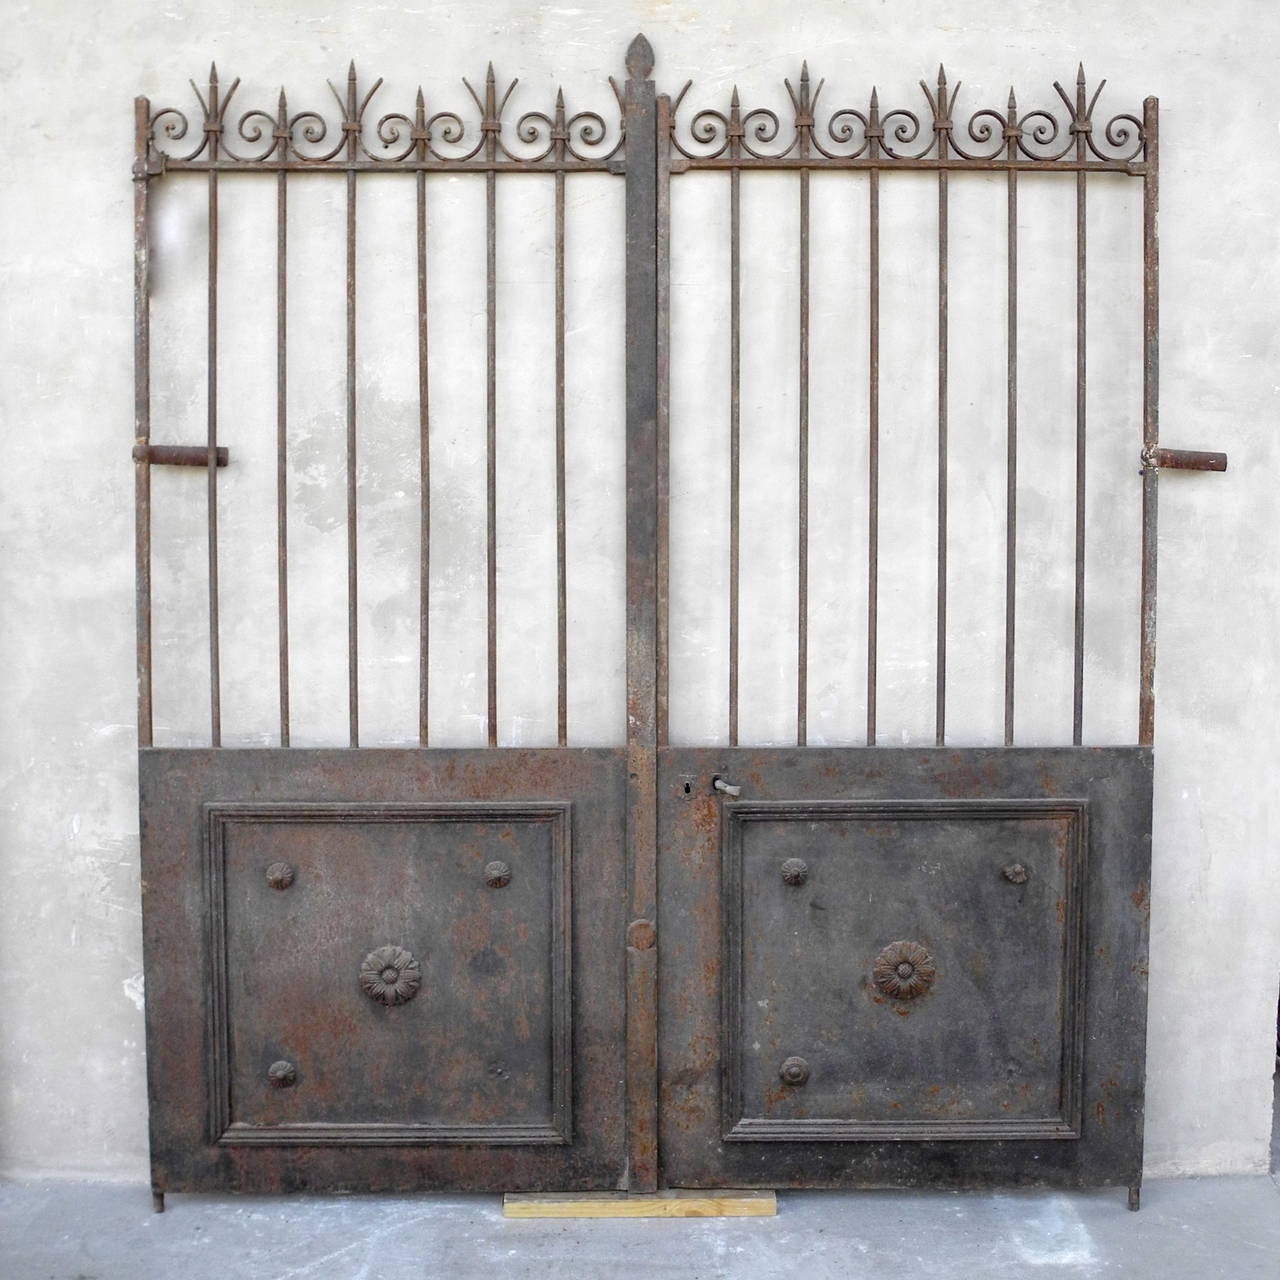 This pair of 19th century antique gates, or portail, originally stood at the front of a Bastide near Apt, France. These gates have retained their beauty and integrity over the last two hundred years and still sport their original swirled designs on